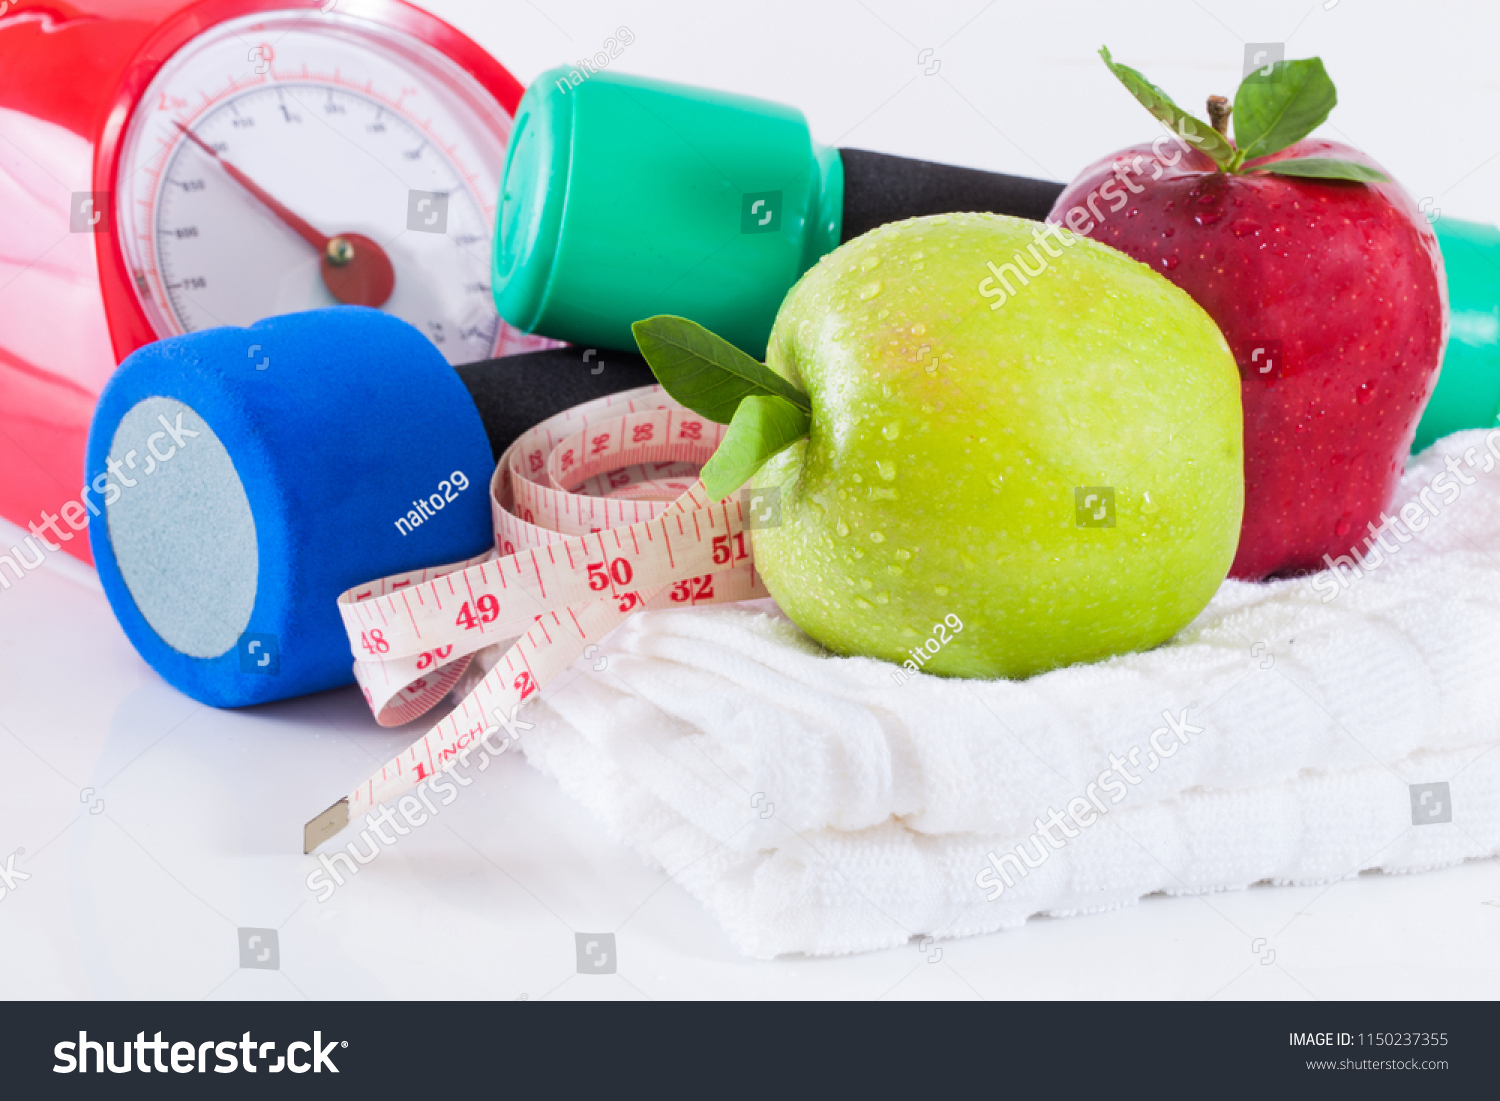 Dumbells with measuring tape and apples #1150237355